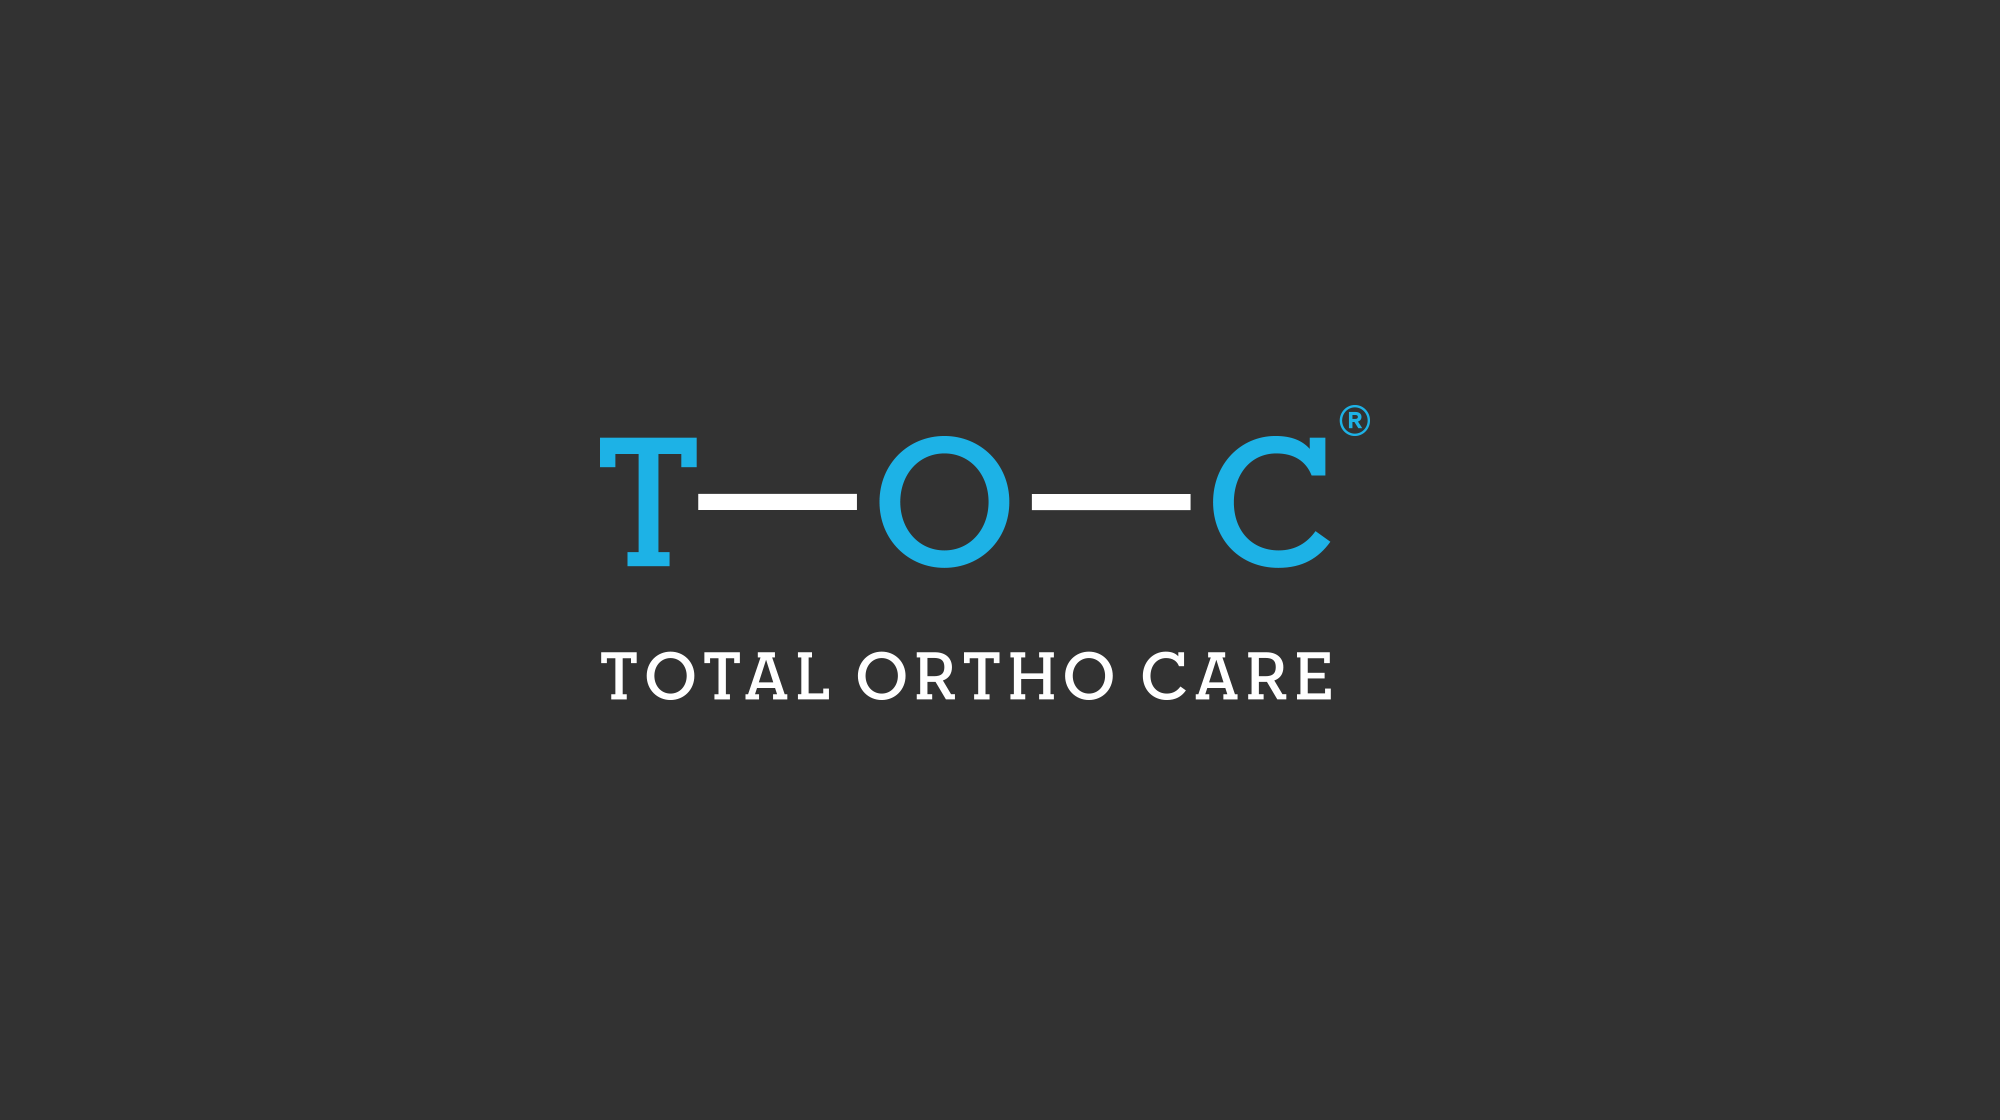 TOTAL ORTHO CARE